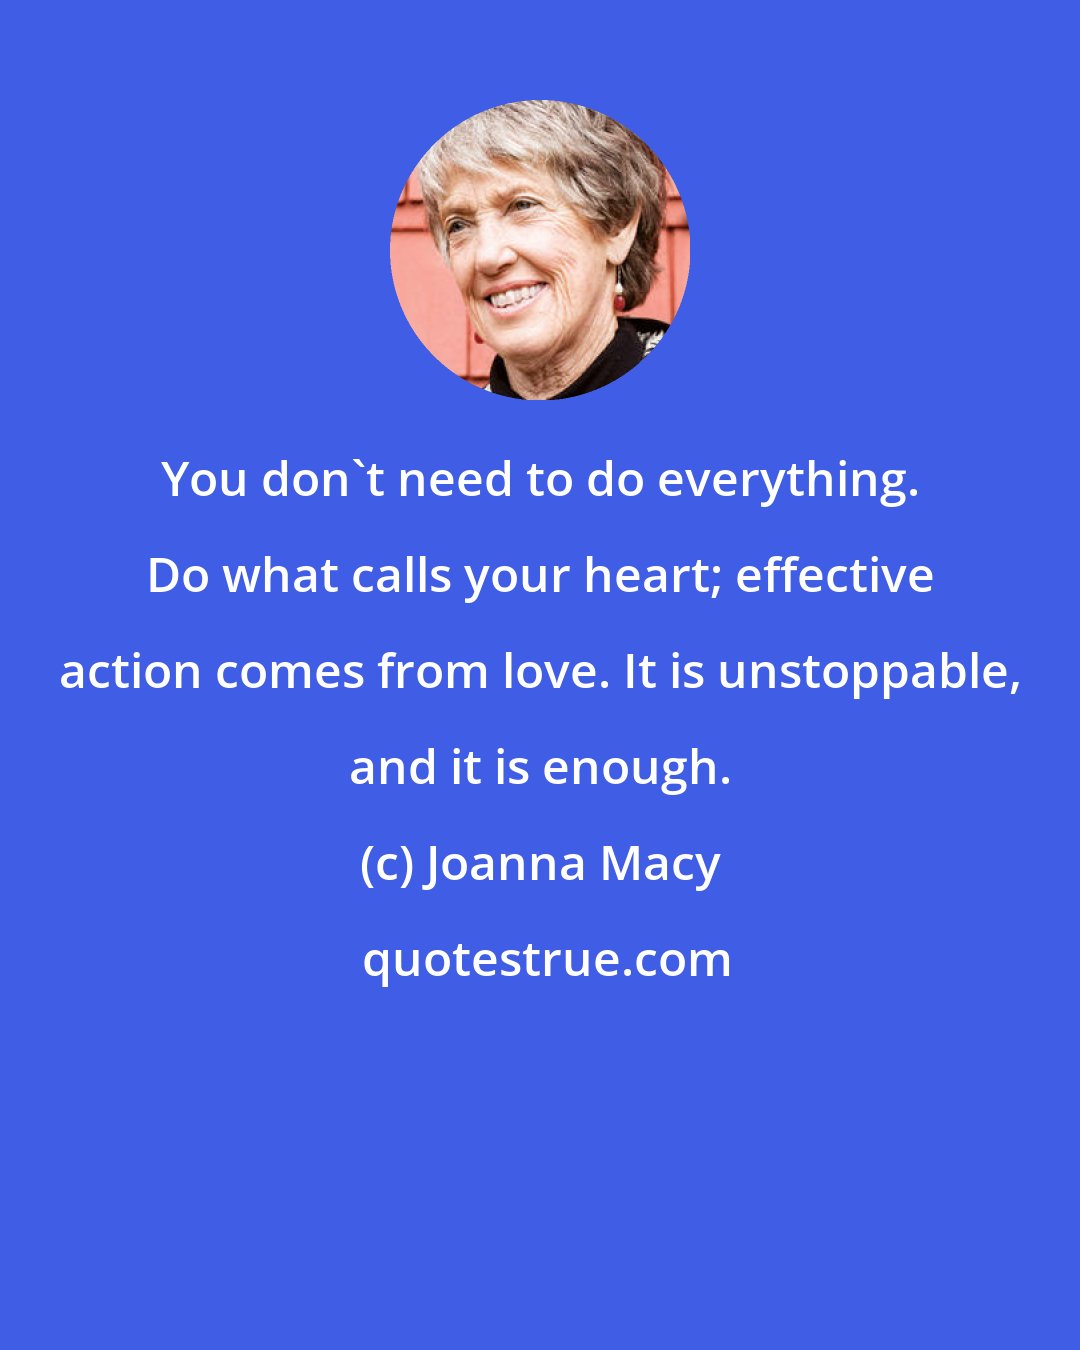 Joanna Macy: You don't need to do everything. Do what calls your heart; effective action comes from love. It is unstoppable, and it is enough.